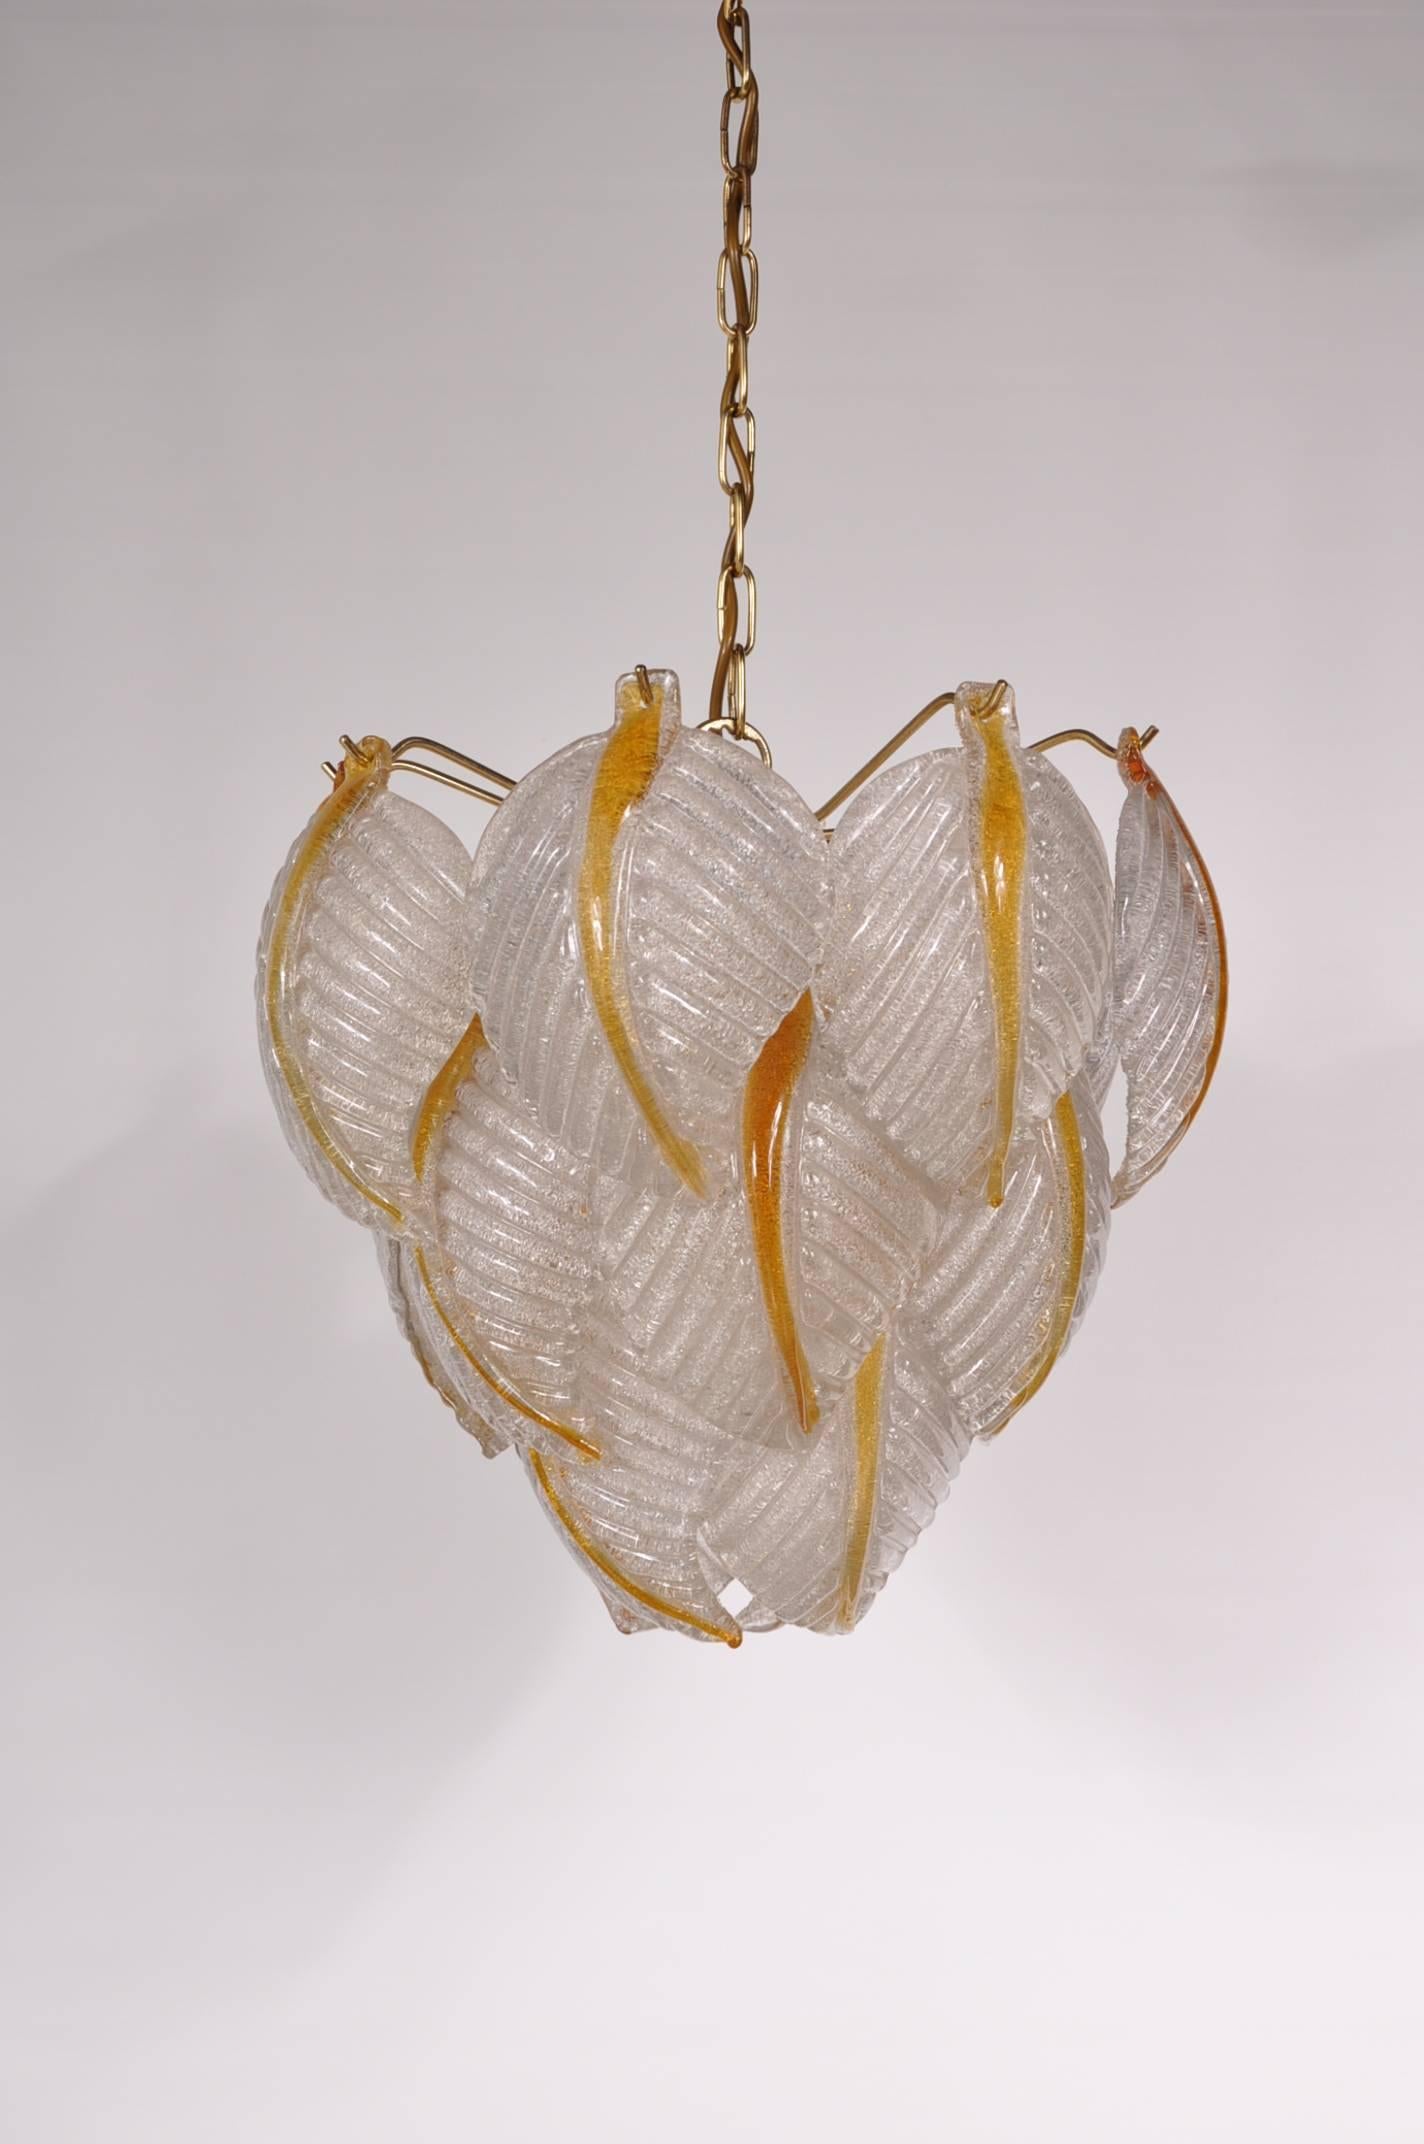 Mid-20th Century Murano Glass Ceiling Lamp by Mazzega, Italy, circa 1960 For Sale